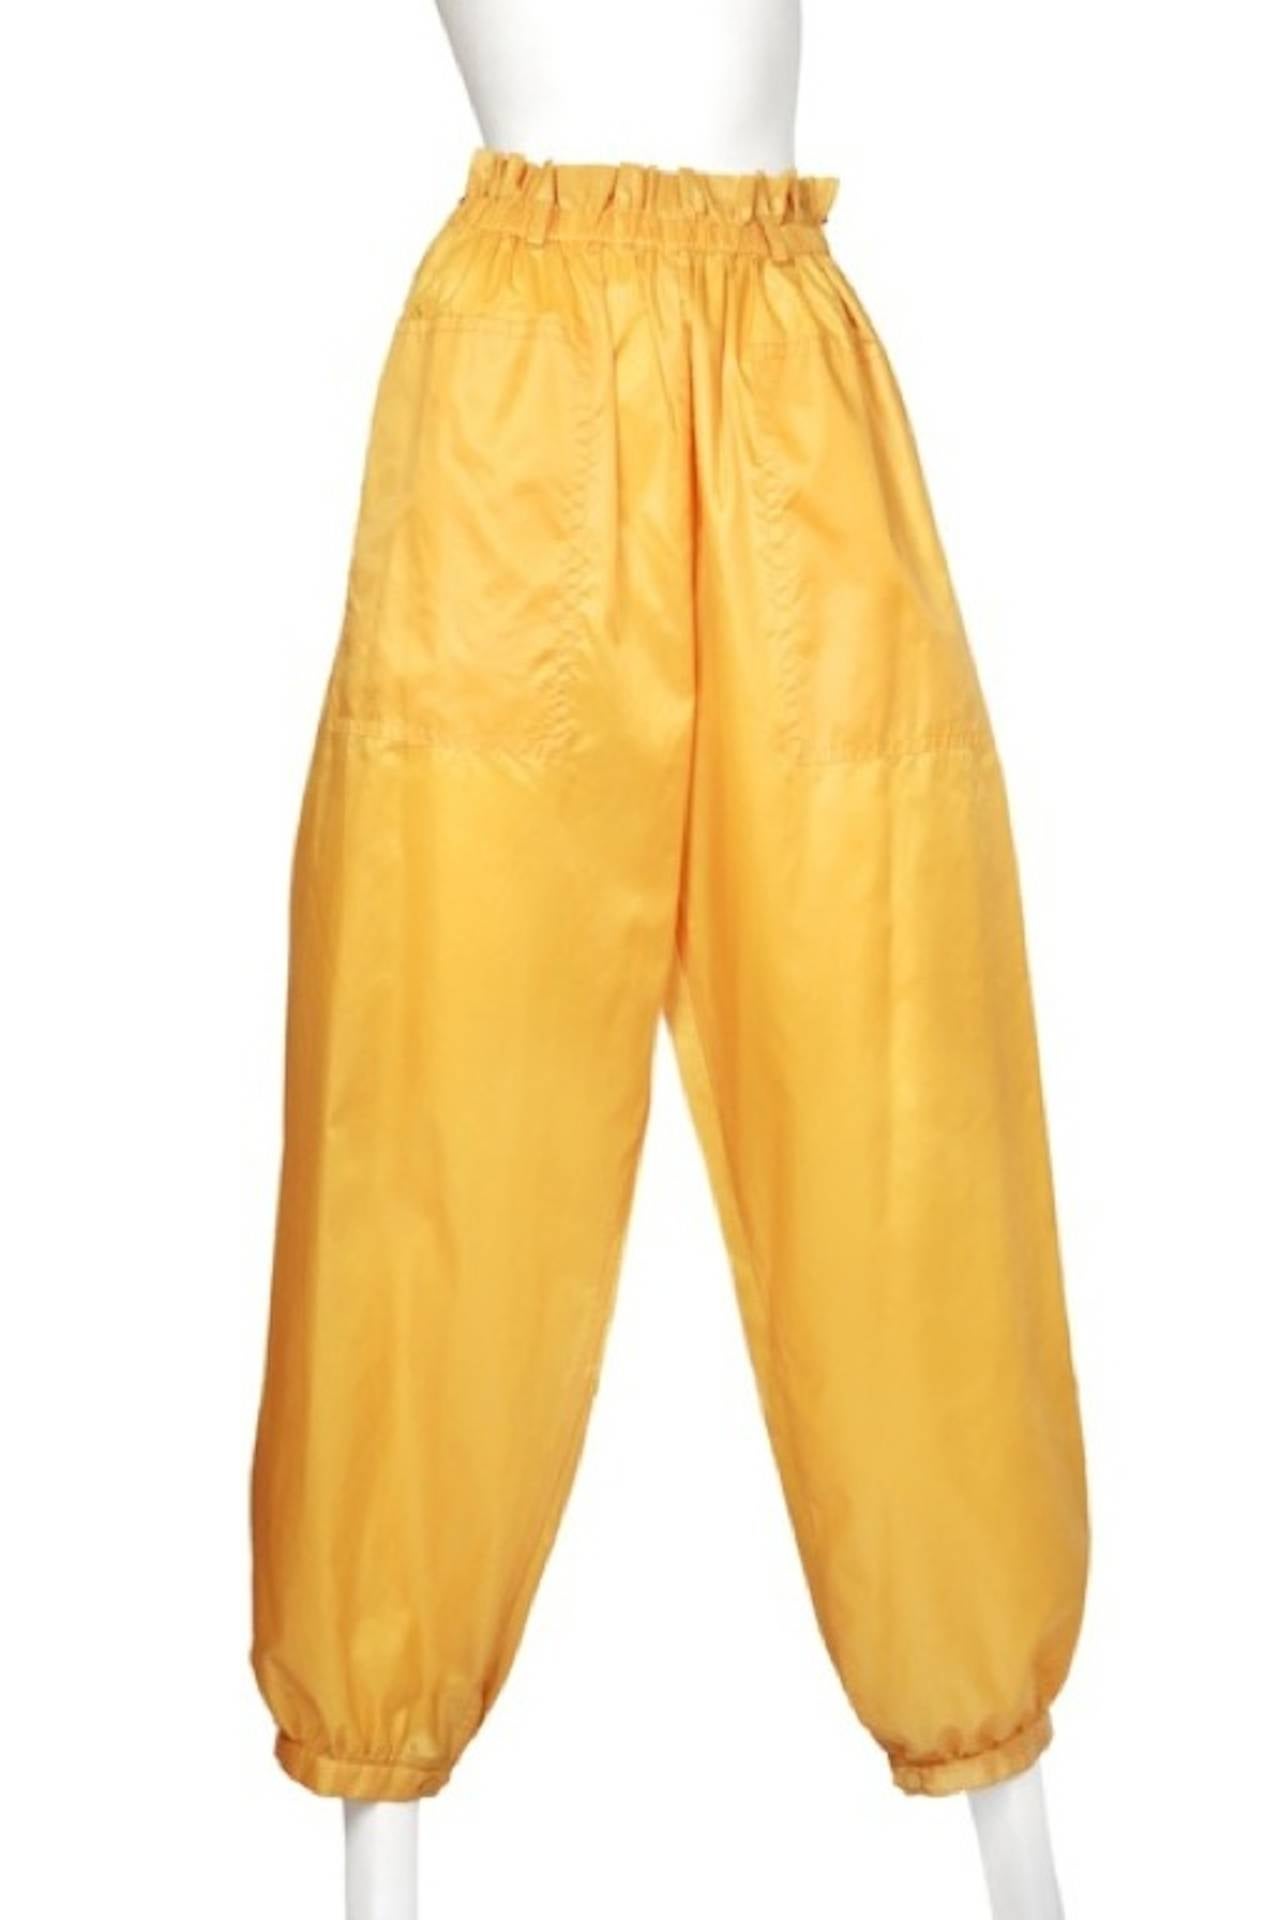 Vintage Issey Miyake classic rain slicker yellow two piece rain ensemble. 
The jacket has an open cape style body and adjustable cuffs and snap closure at neck. The pants have elastic waistband and patch pockets.